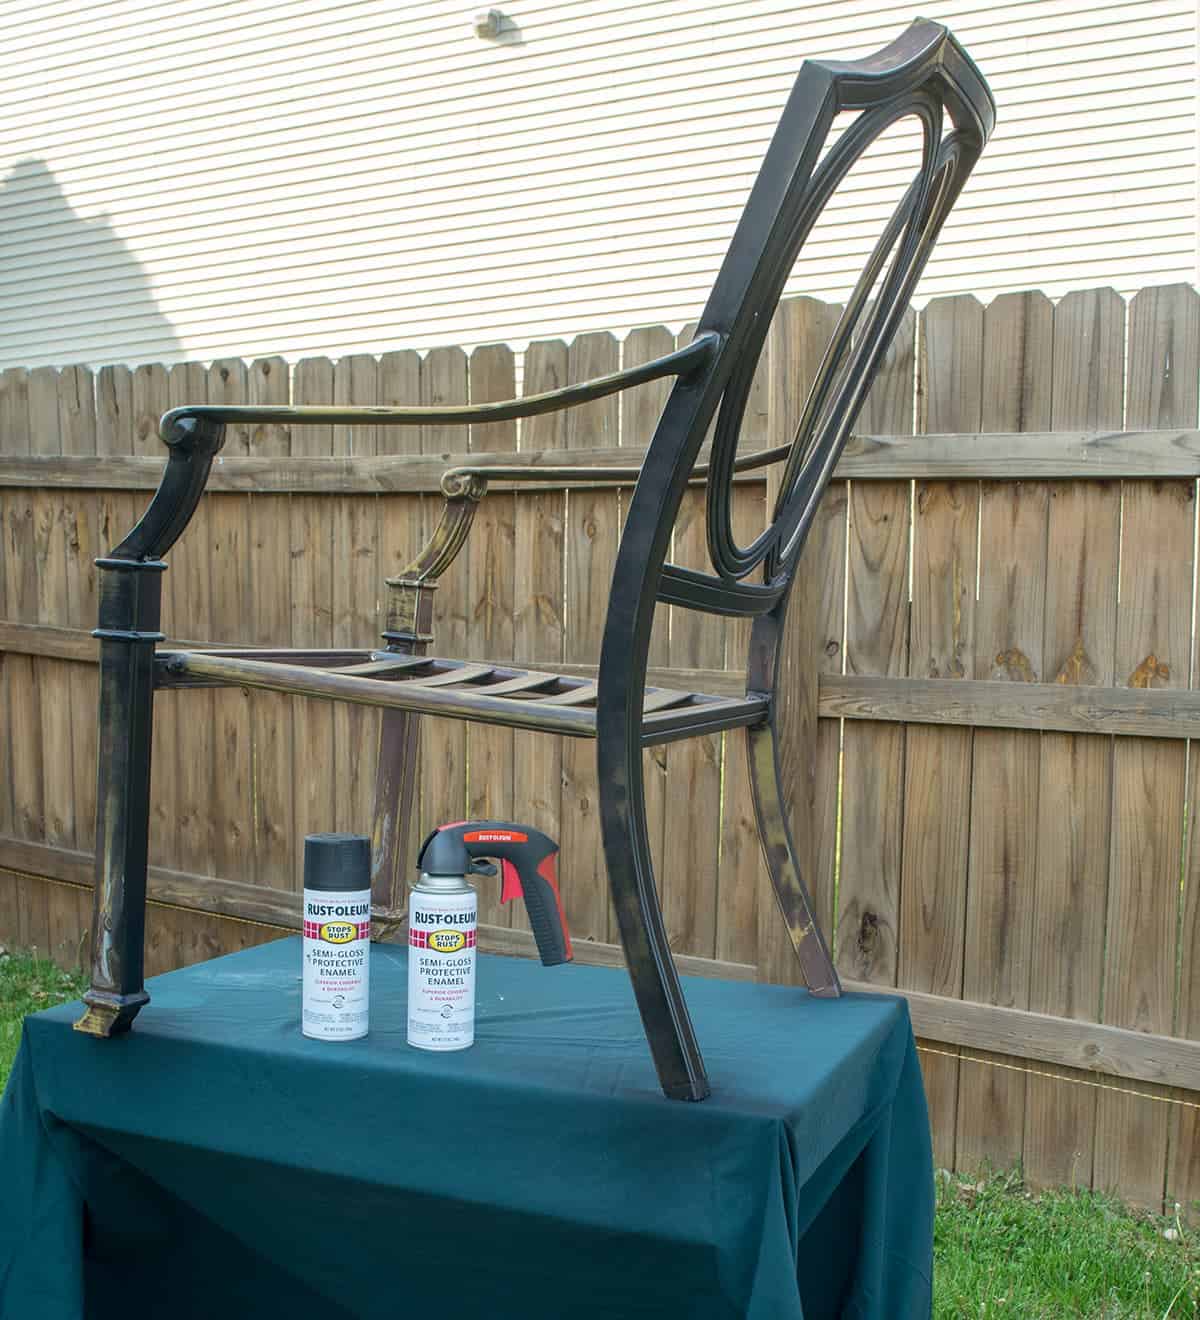 How To Spray Paint Outdoor Furniture, How To Remove Spray Paint From Patio Furniture